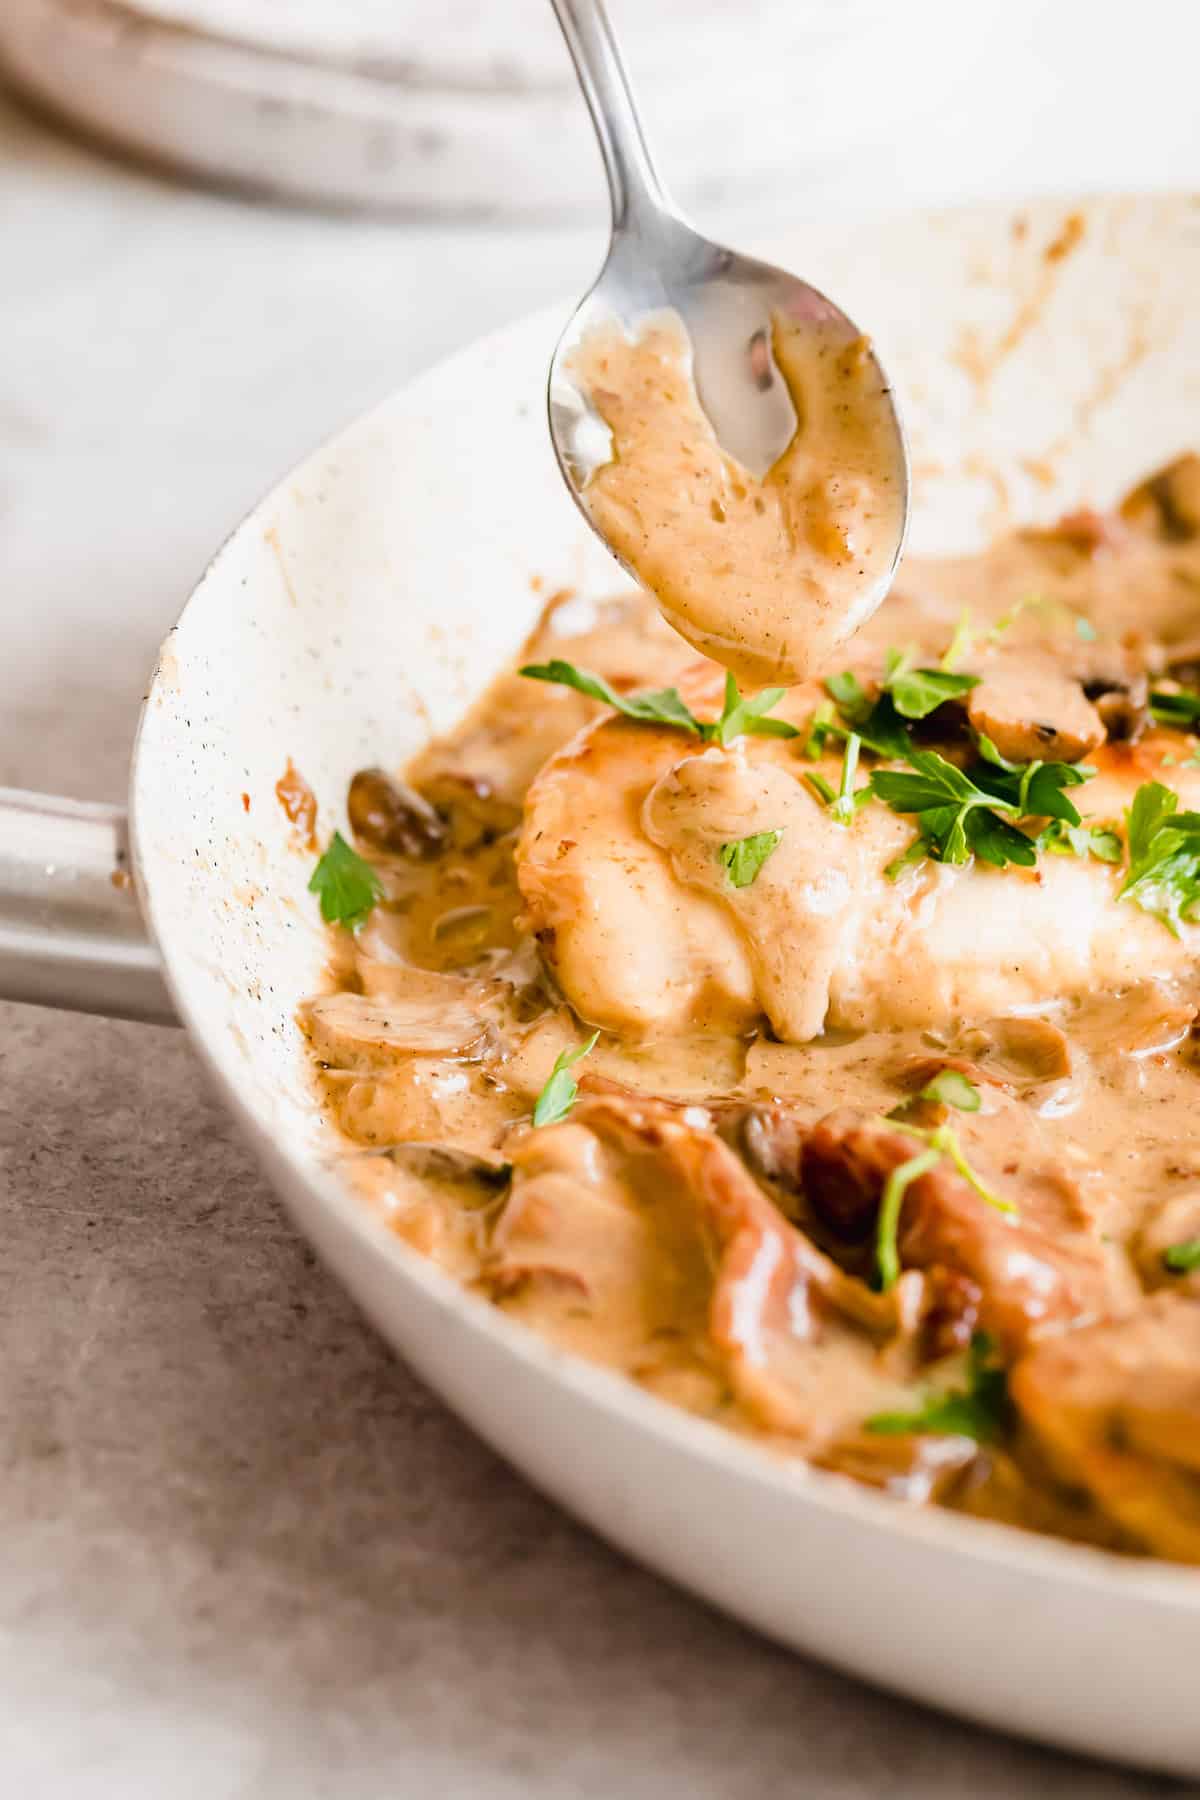 A spoon pouring creamy sauce over a piece of chicken with fresh herbs sprinkled on top.